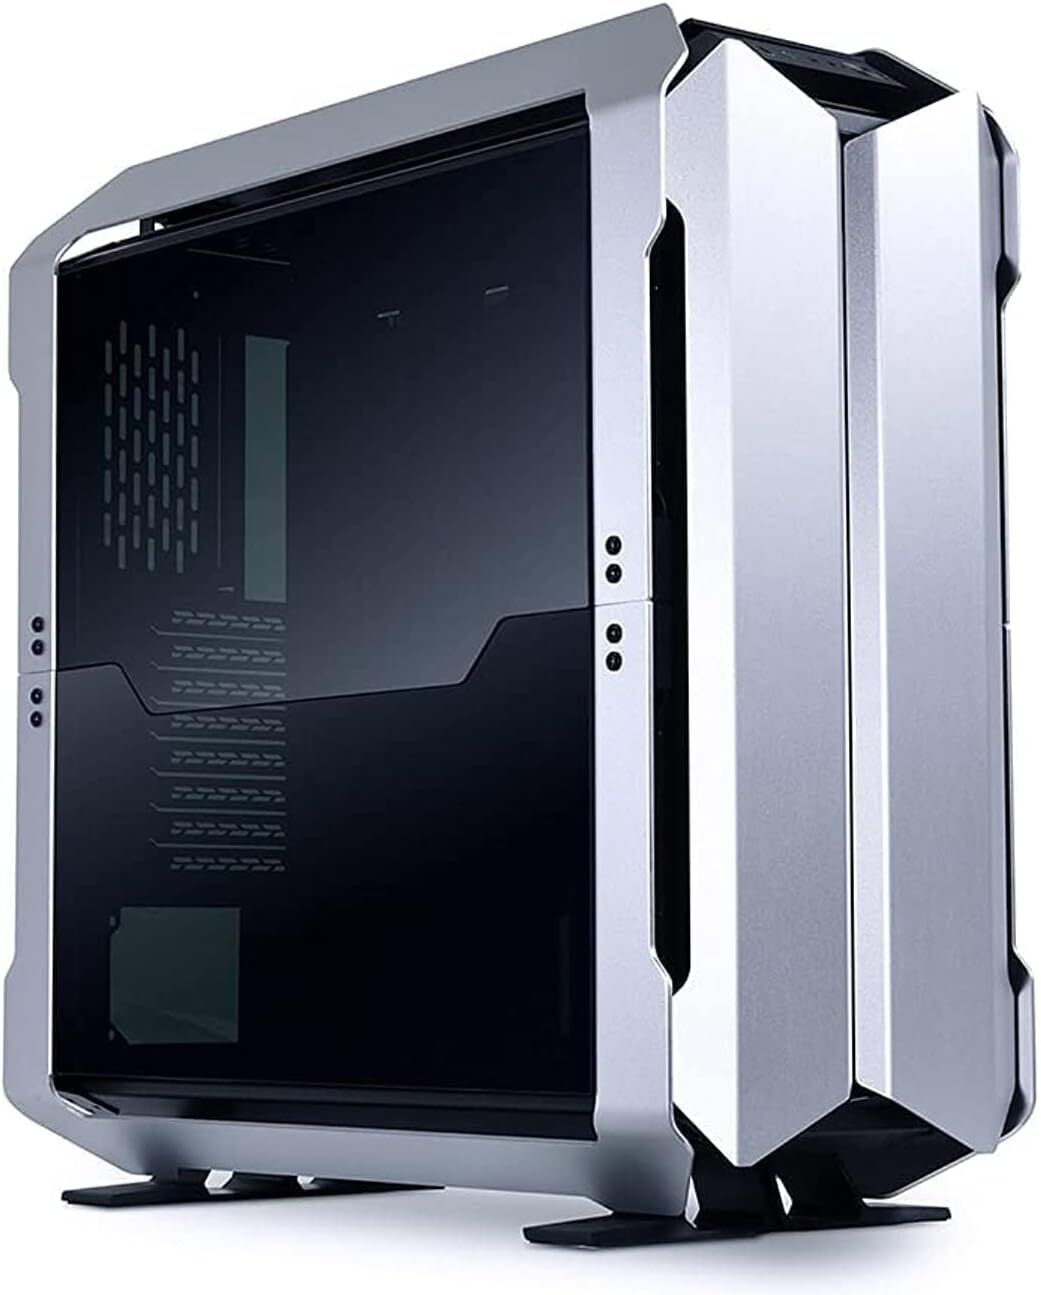 Lian Li Odyssey X Silver Tempered Glass Aluminum Full Tower Gaming Computer Case